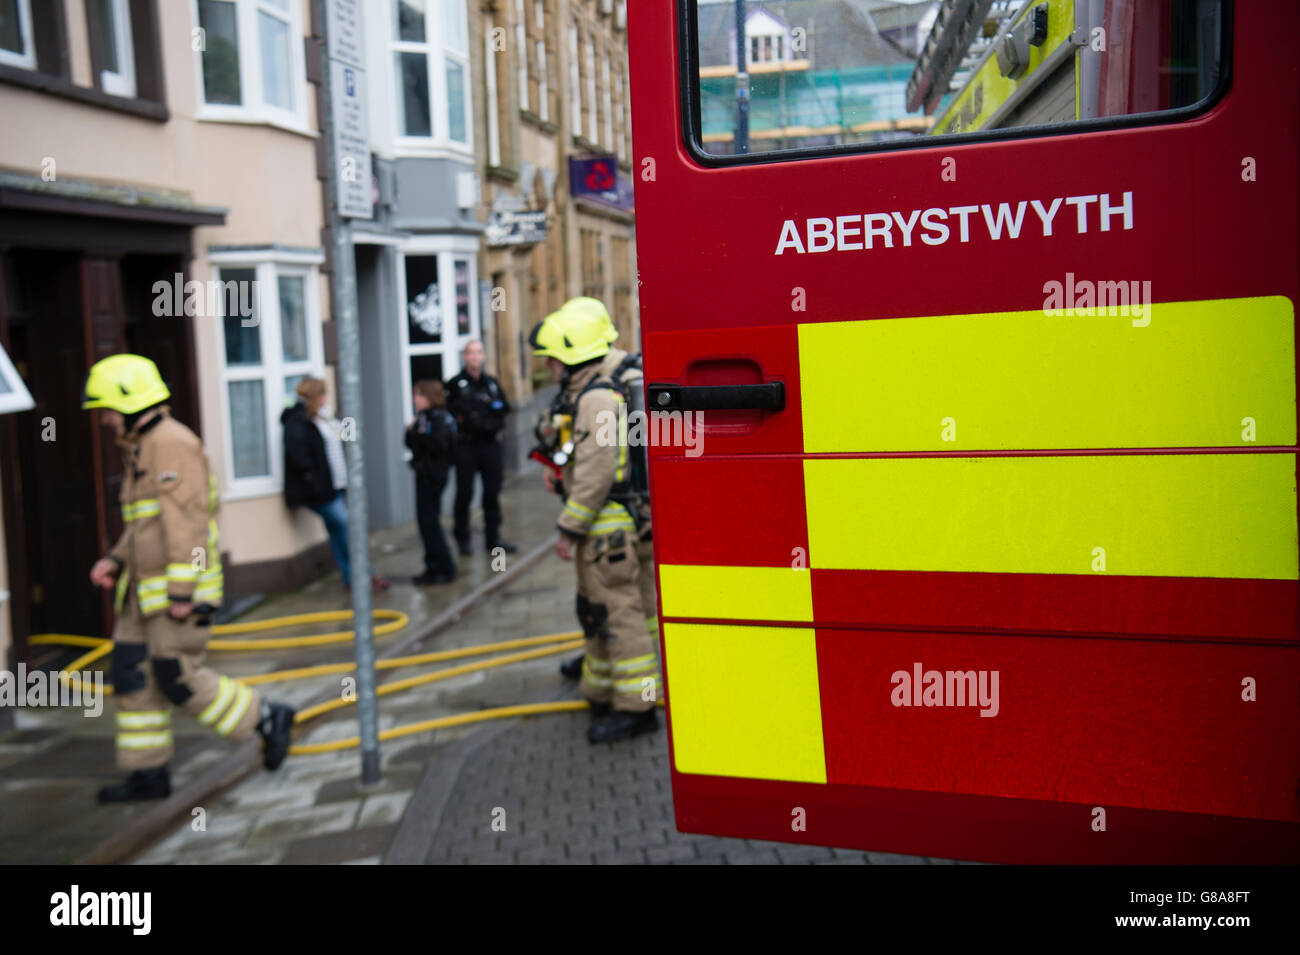 Emergency services: Firemen attending to a small kitchen fire in a house in Aberystwyth Wales UK Stock Photo